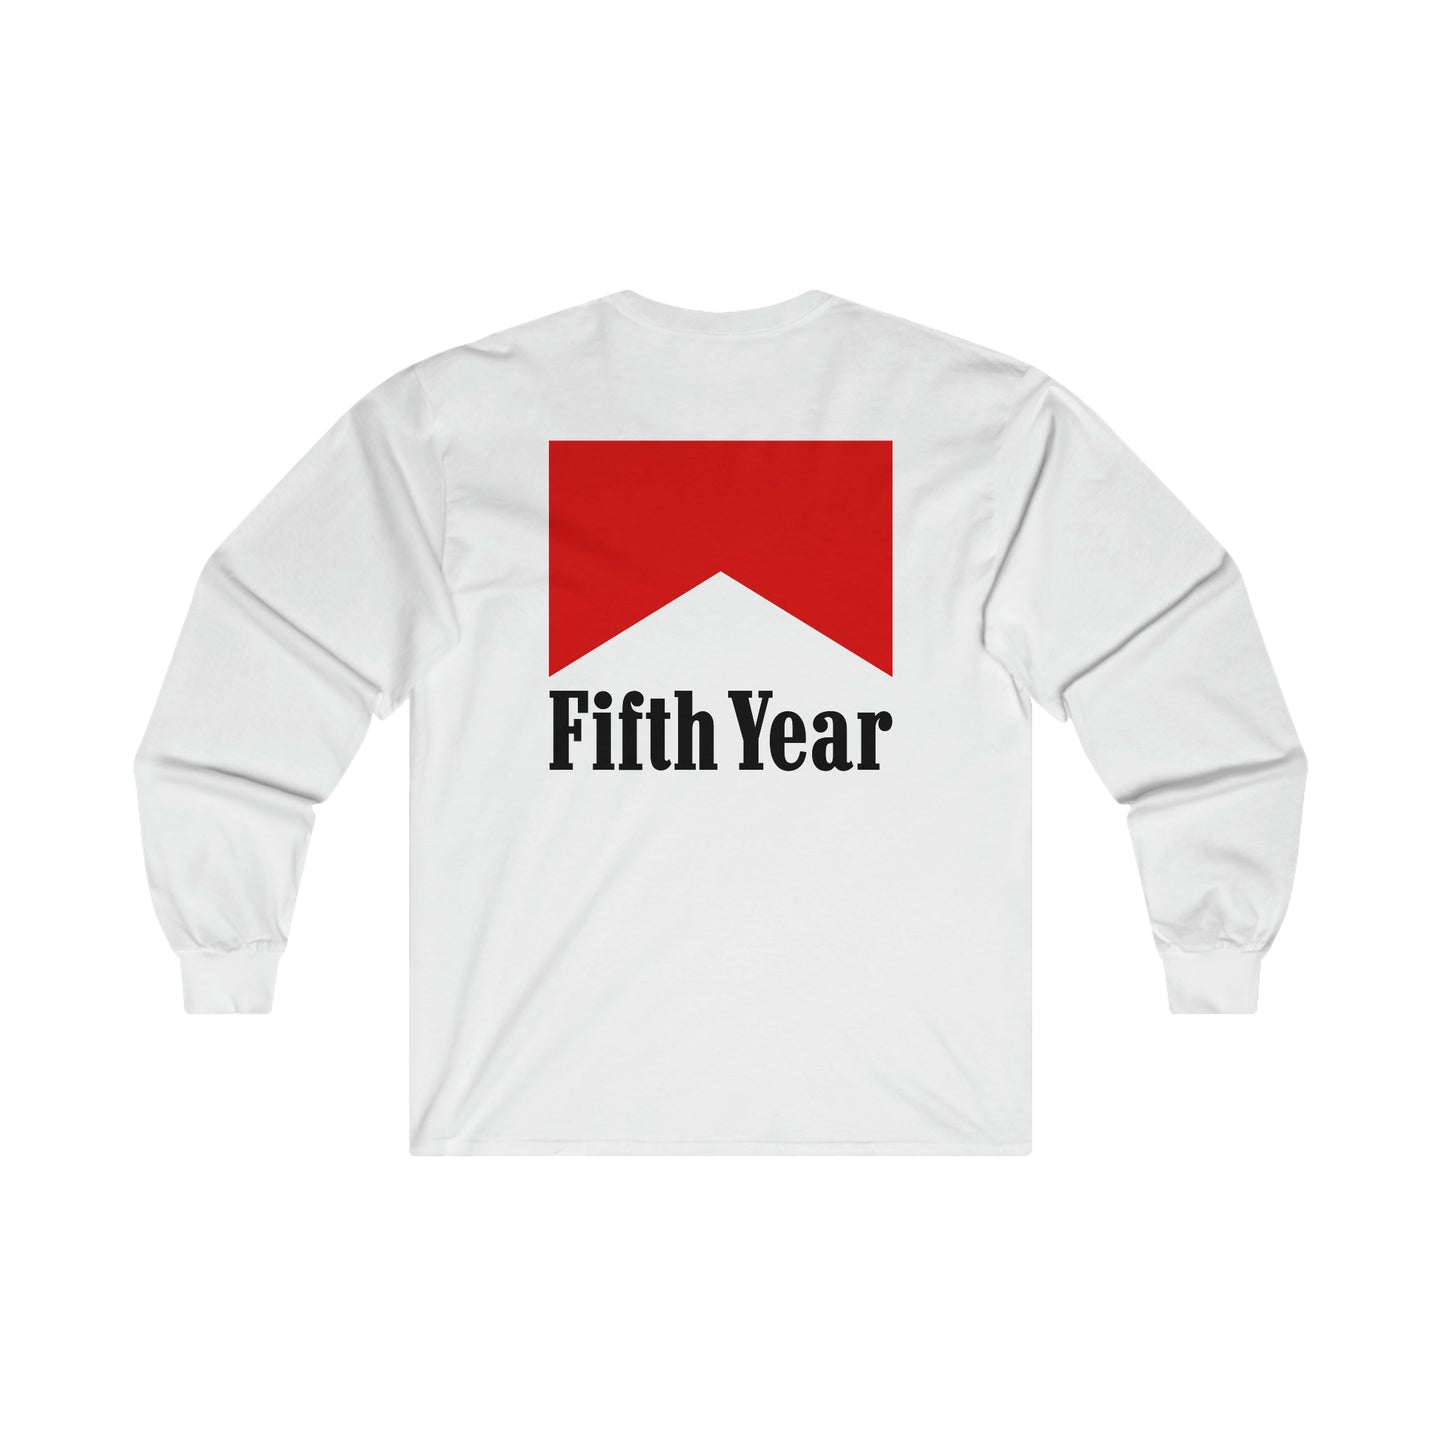 Fifth Year Cigarettes - Ultra Cotton Long Sleeve Tee